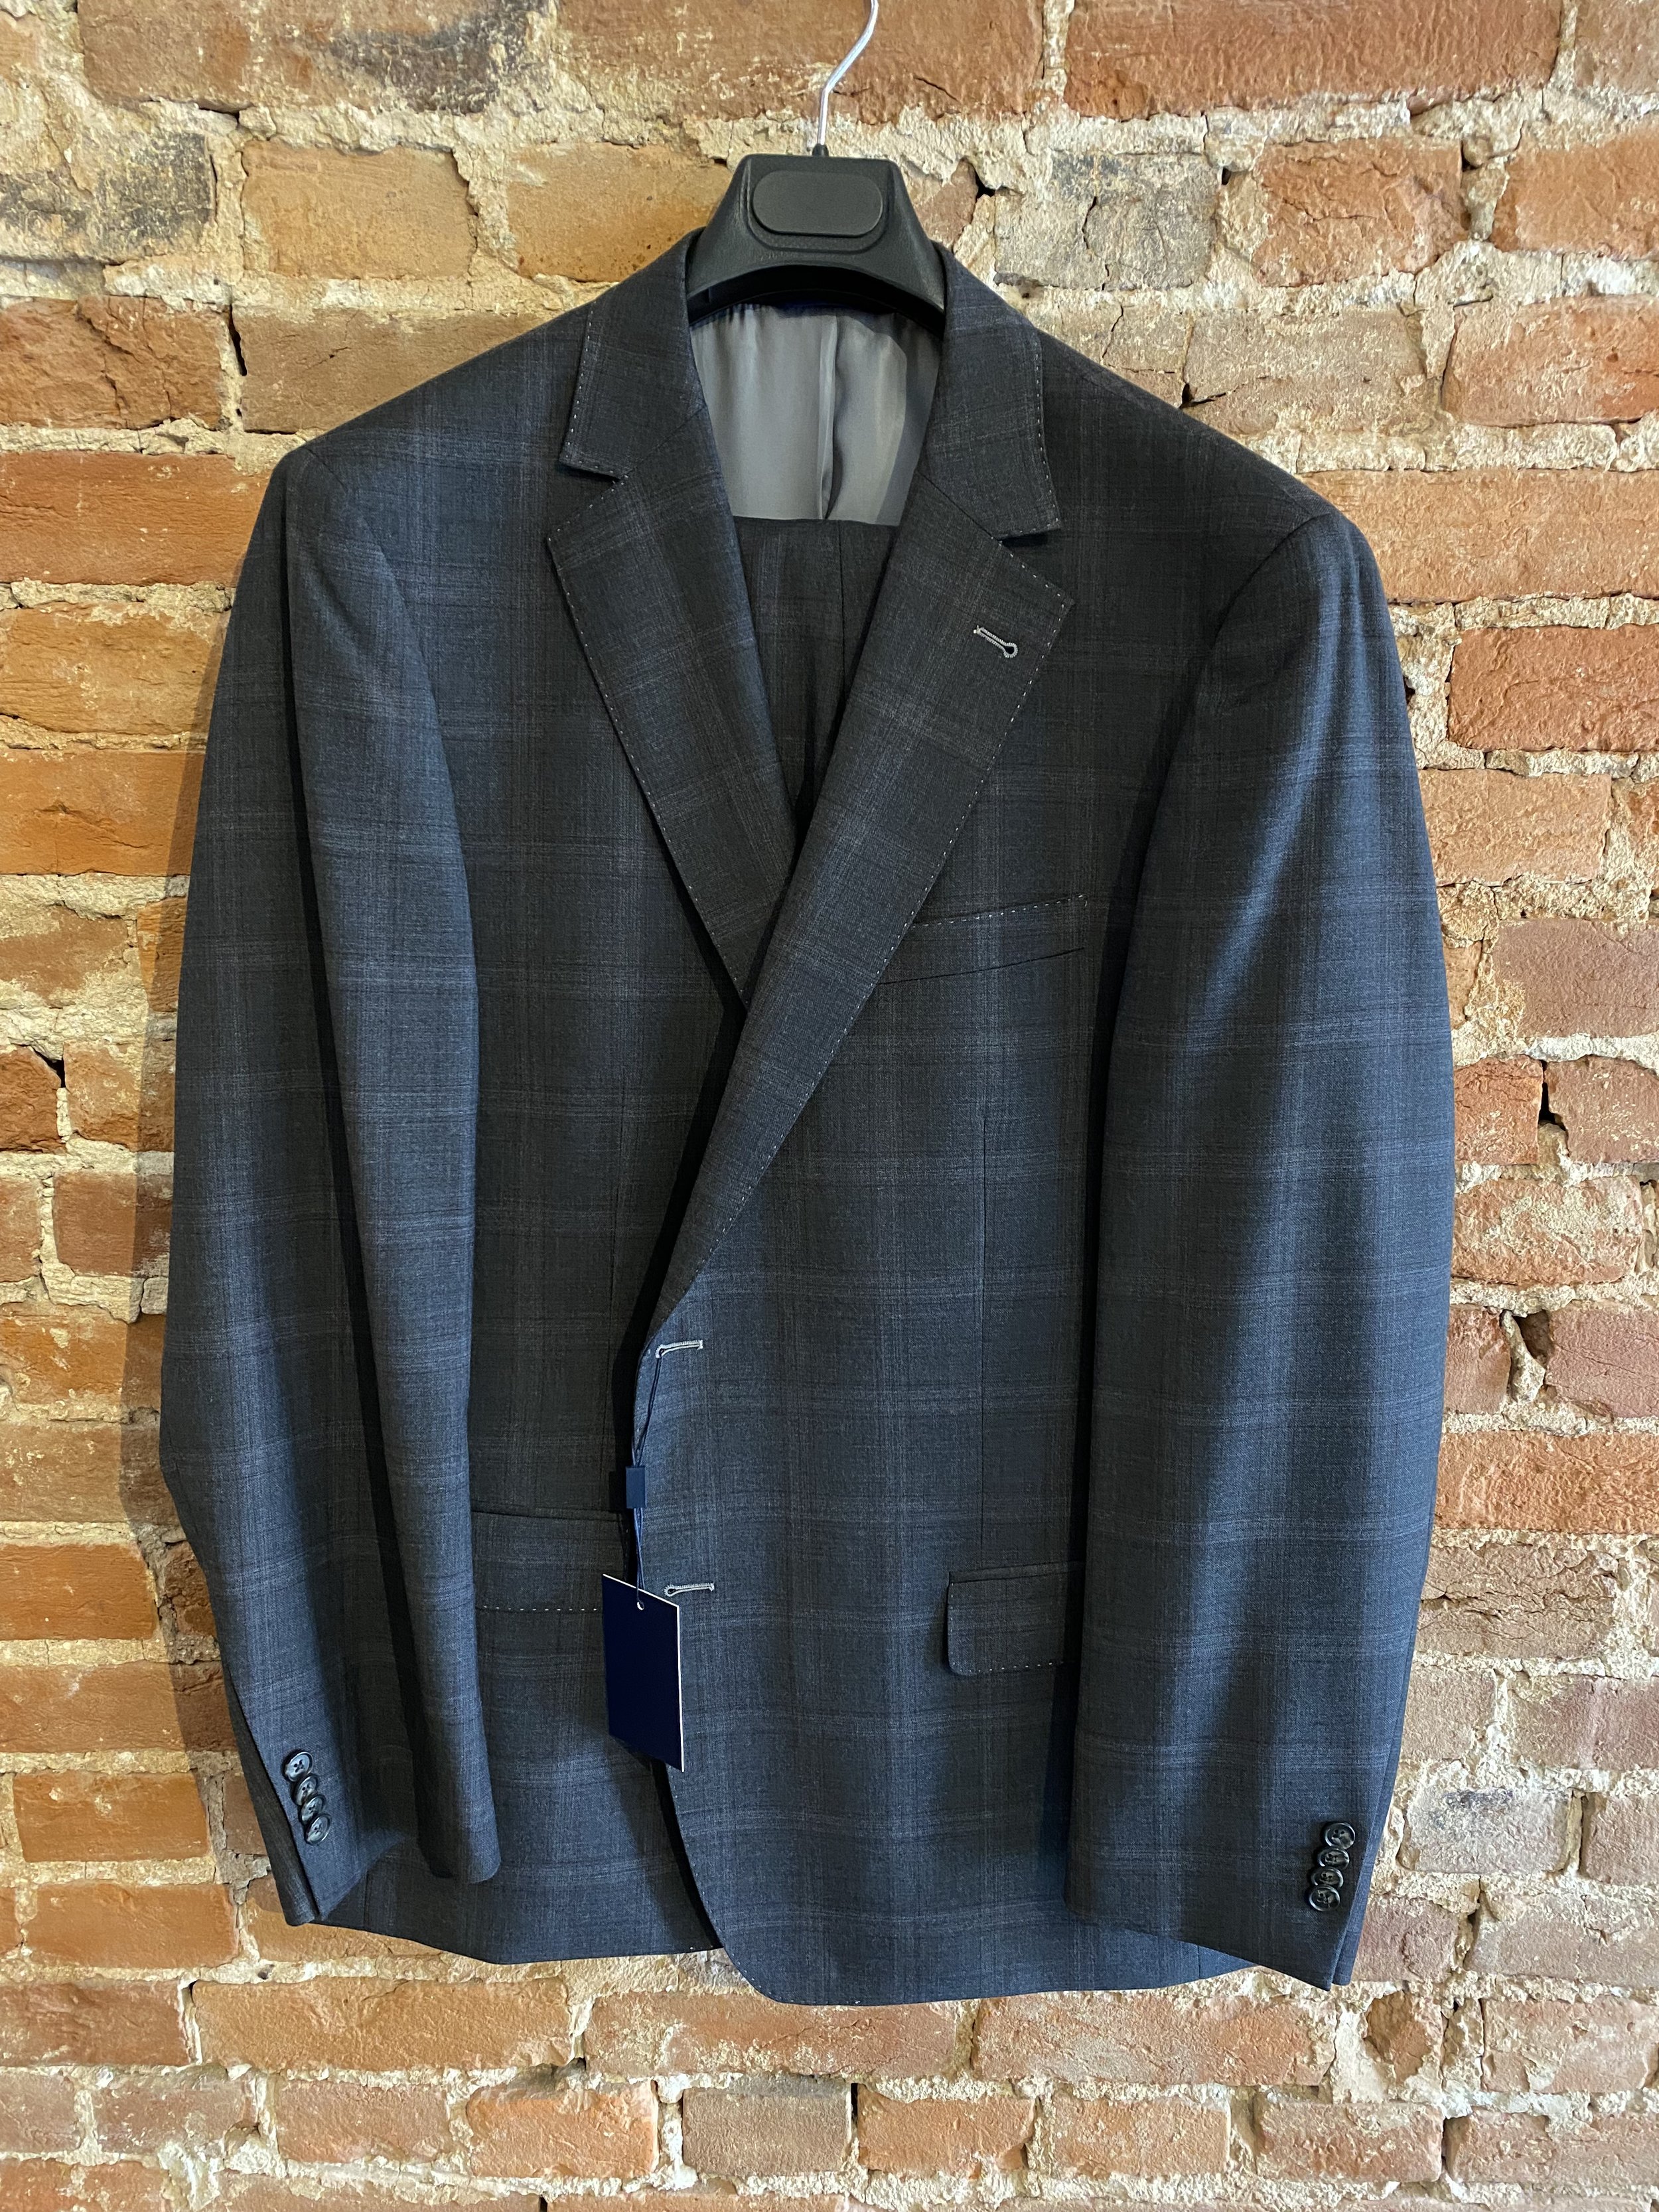 Suits and Sport Coats — Mirror Image Fashions